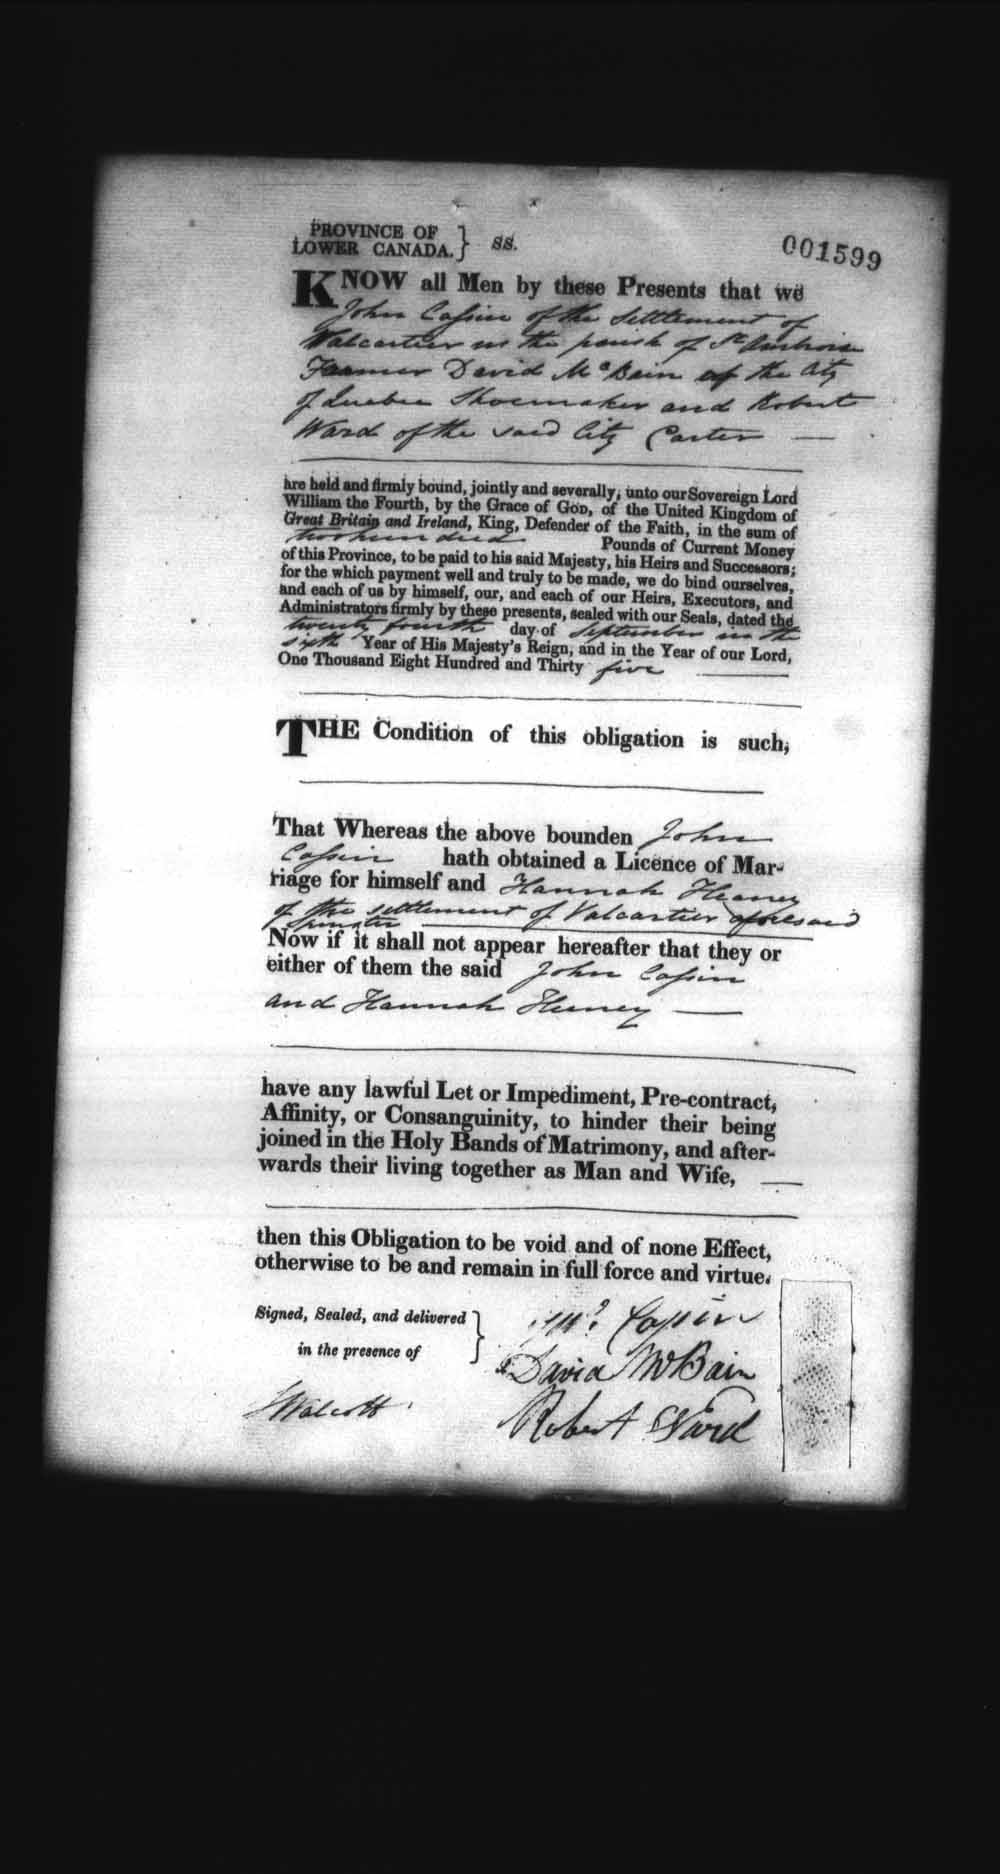 Digitized page of Upper and Lower Canada Marriage Bonds (1779-1865) for Image No.: e008237920